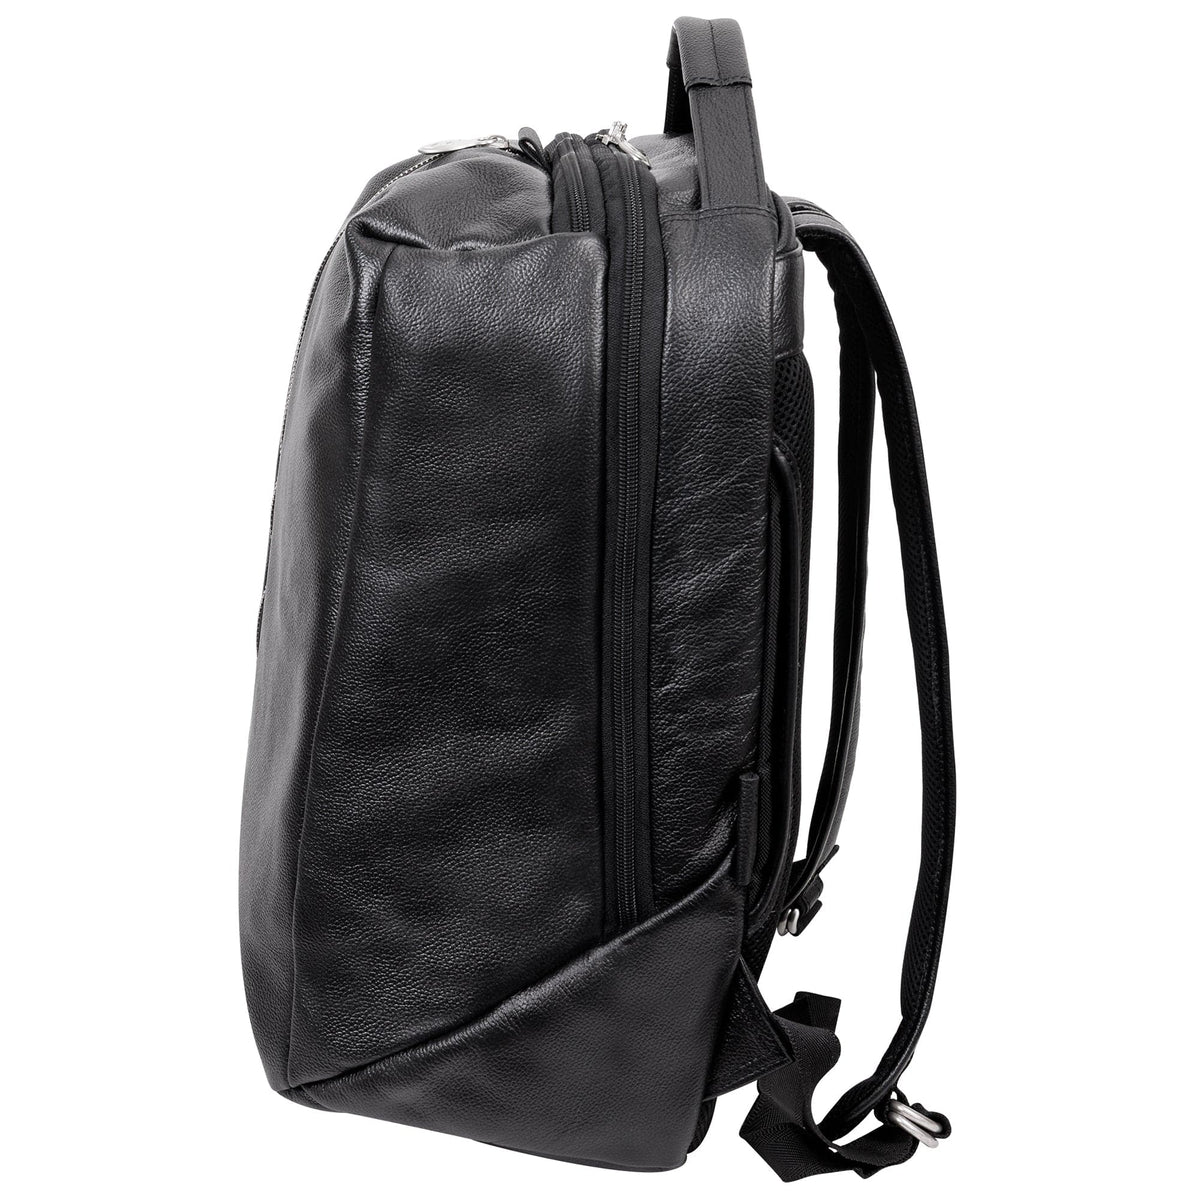 McKlein U Series South Shore 17" Carry-All Laptop and Tablet Overnight Leather Backpack